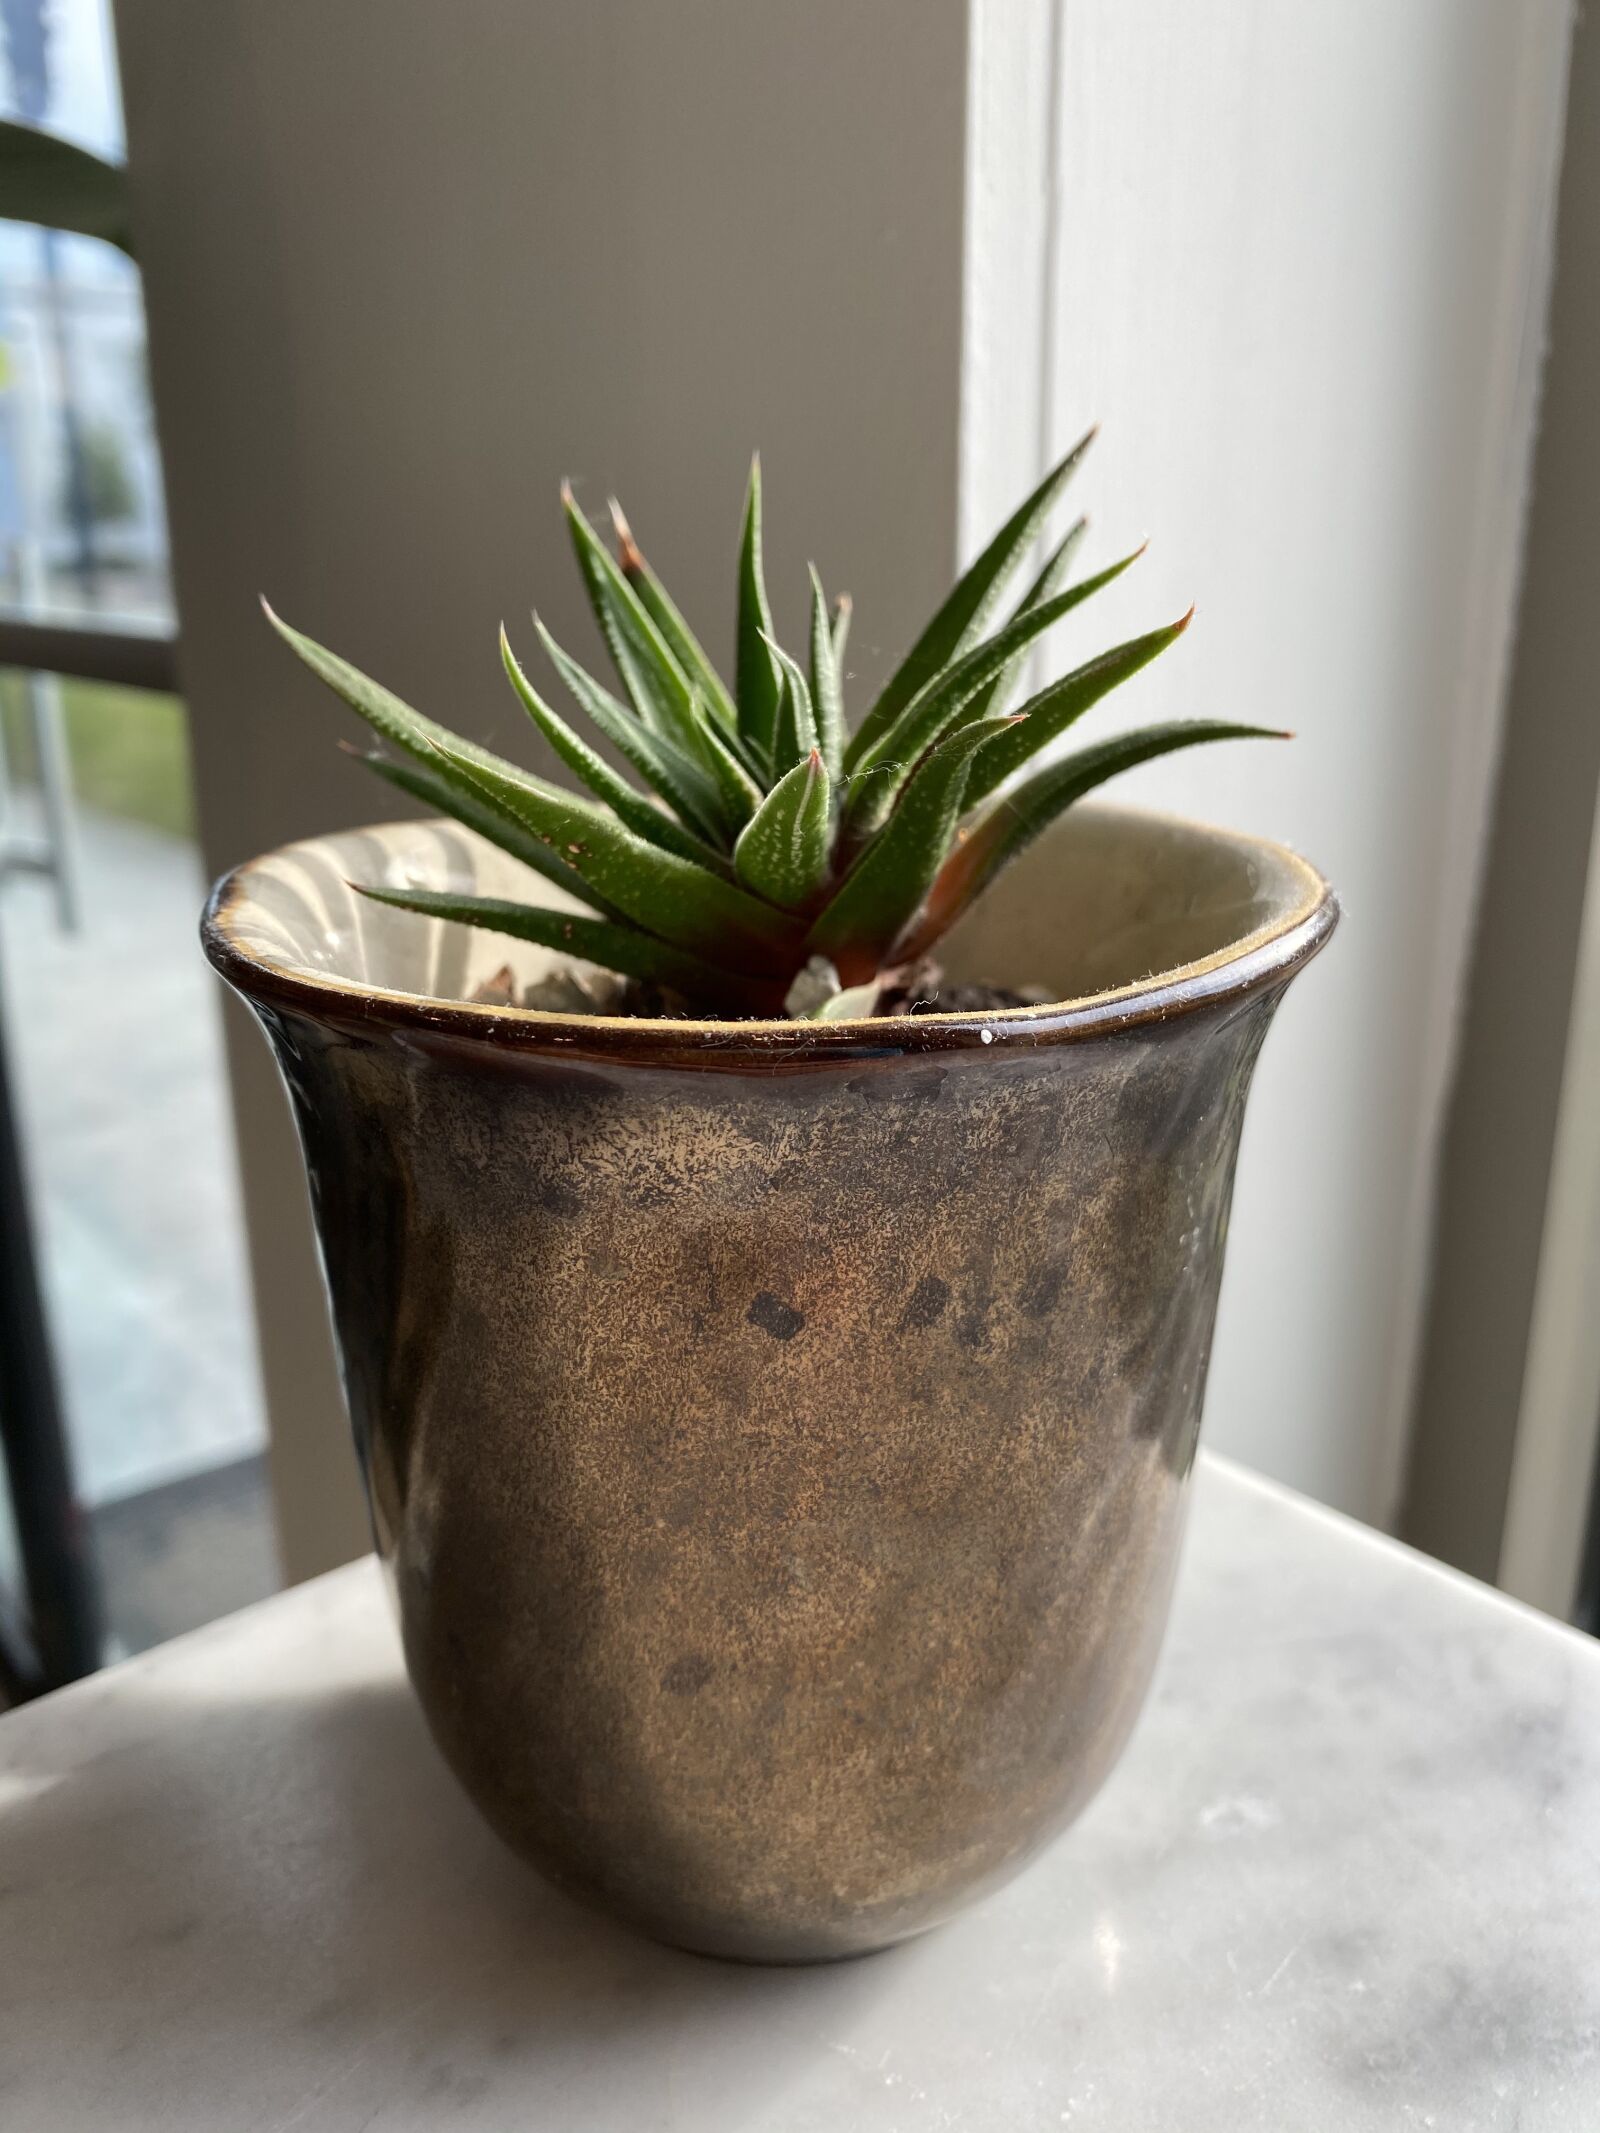 iPhone 11 Pro back triple camera 4.25mm f/1.8 sample photo. Plant, pot, potted photography